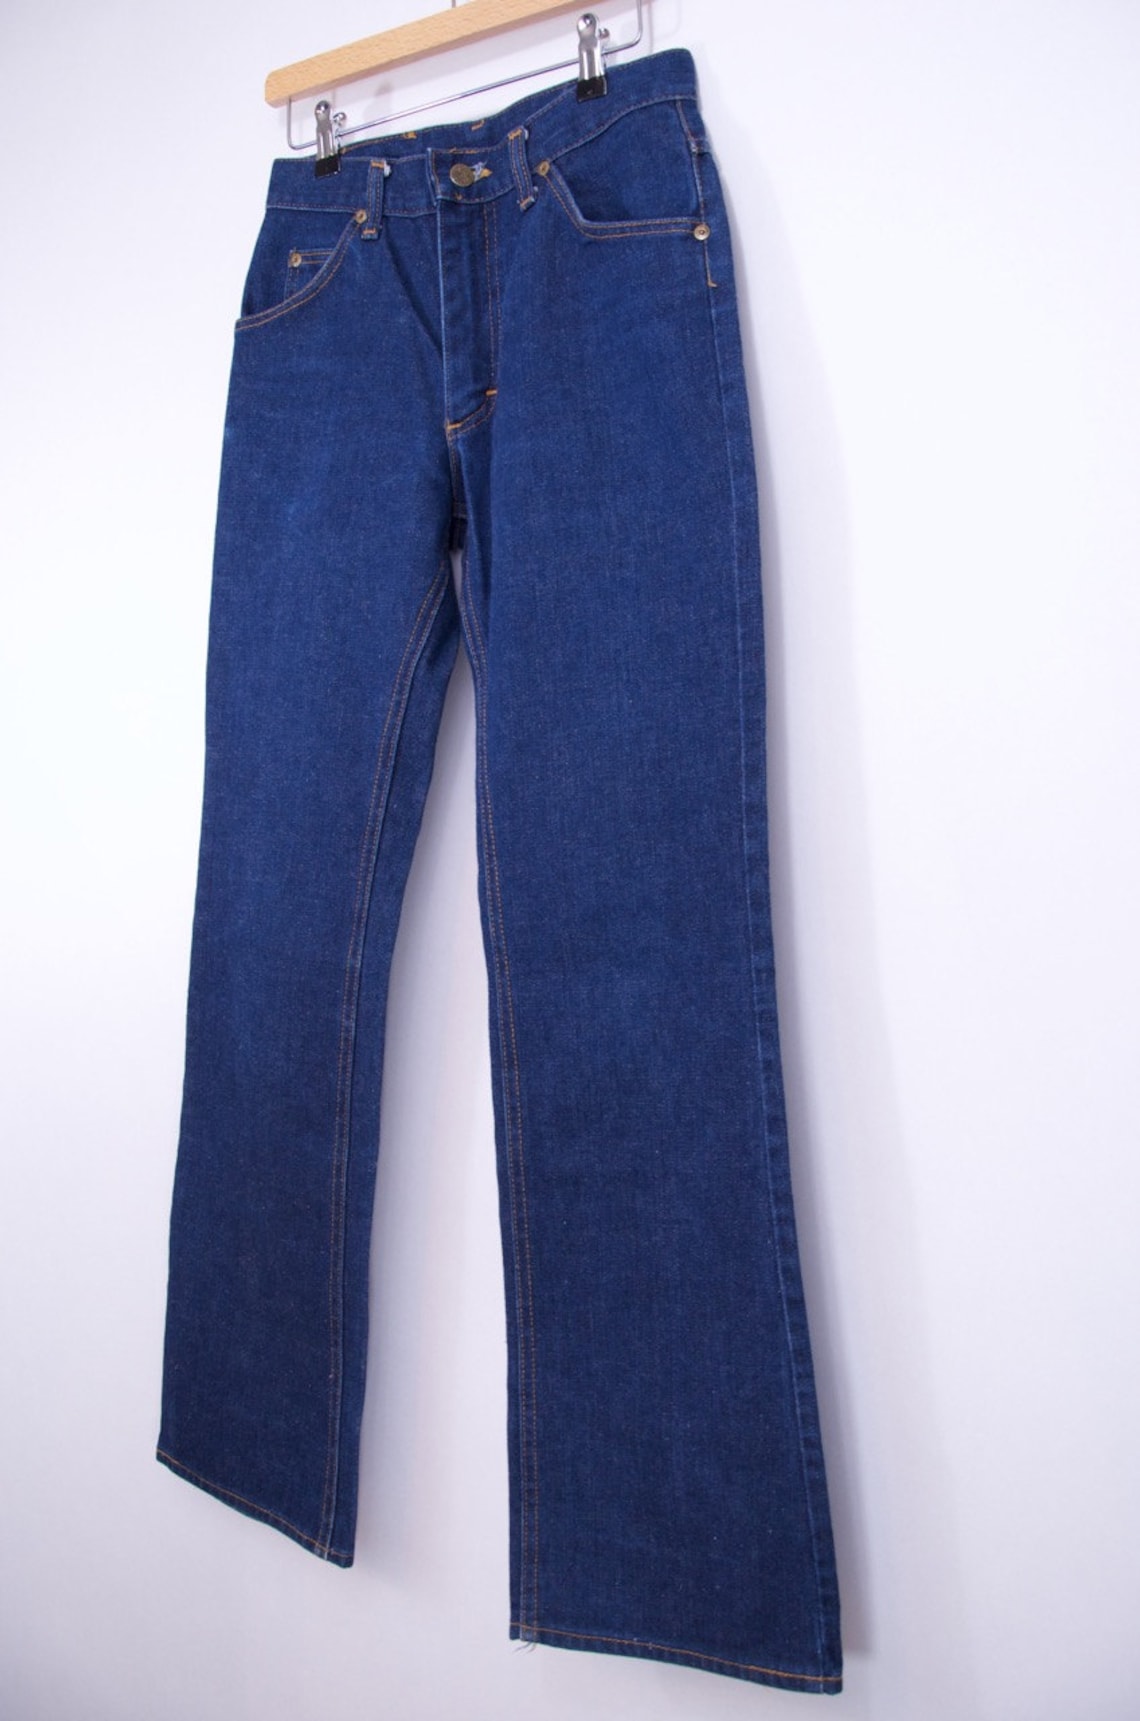 Perfect Vintage 70s LEE JEANS Dark Wash Jeans 70s Clothing - Etsy